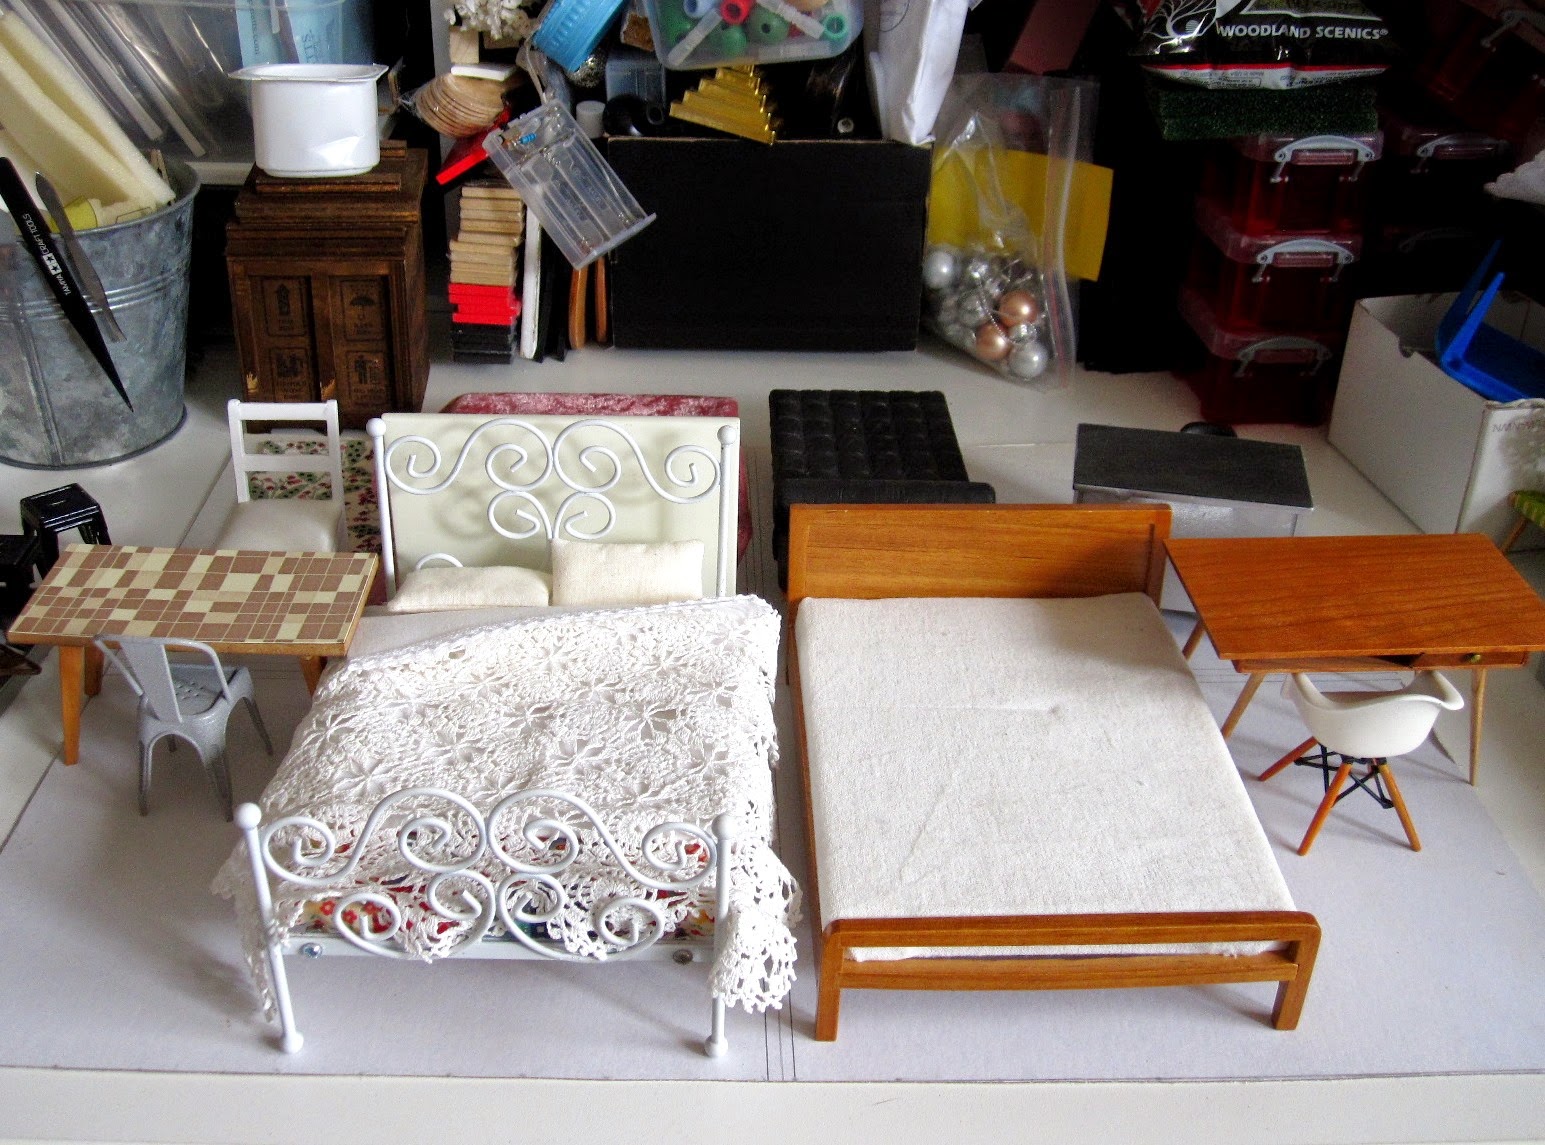 Four sets of modern dolls' house miniature furniture in different styles arranged in room settings on a piece of cardboard.